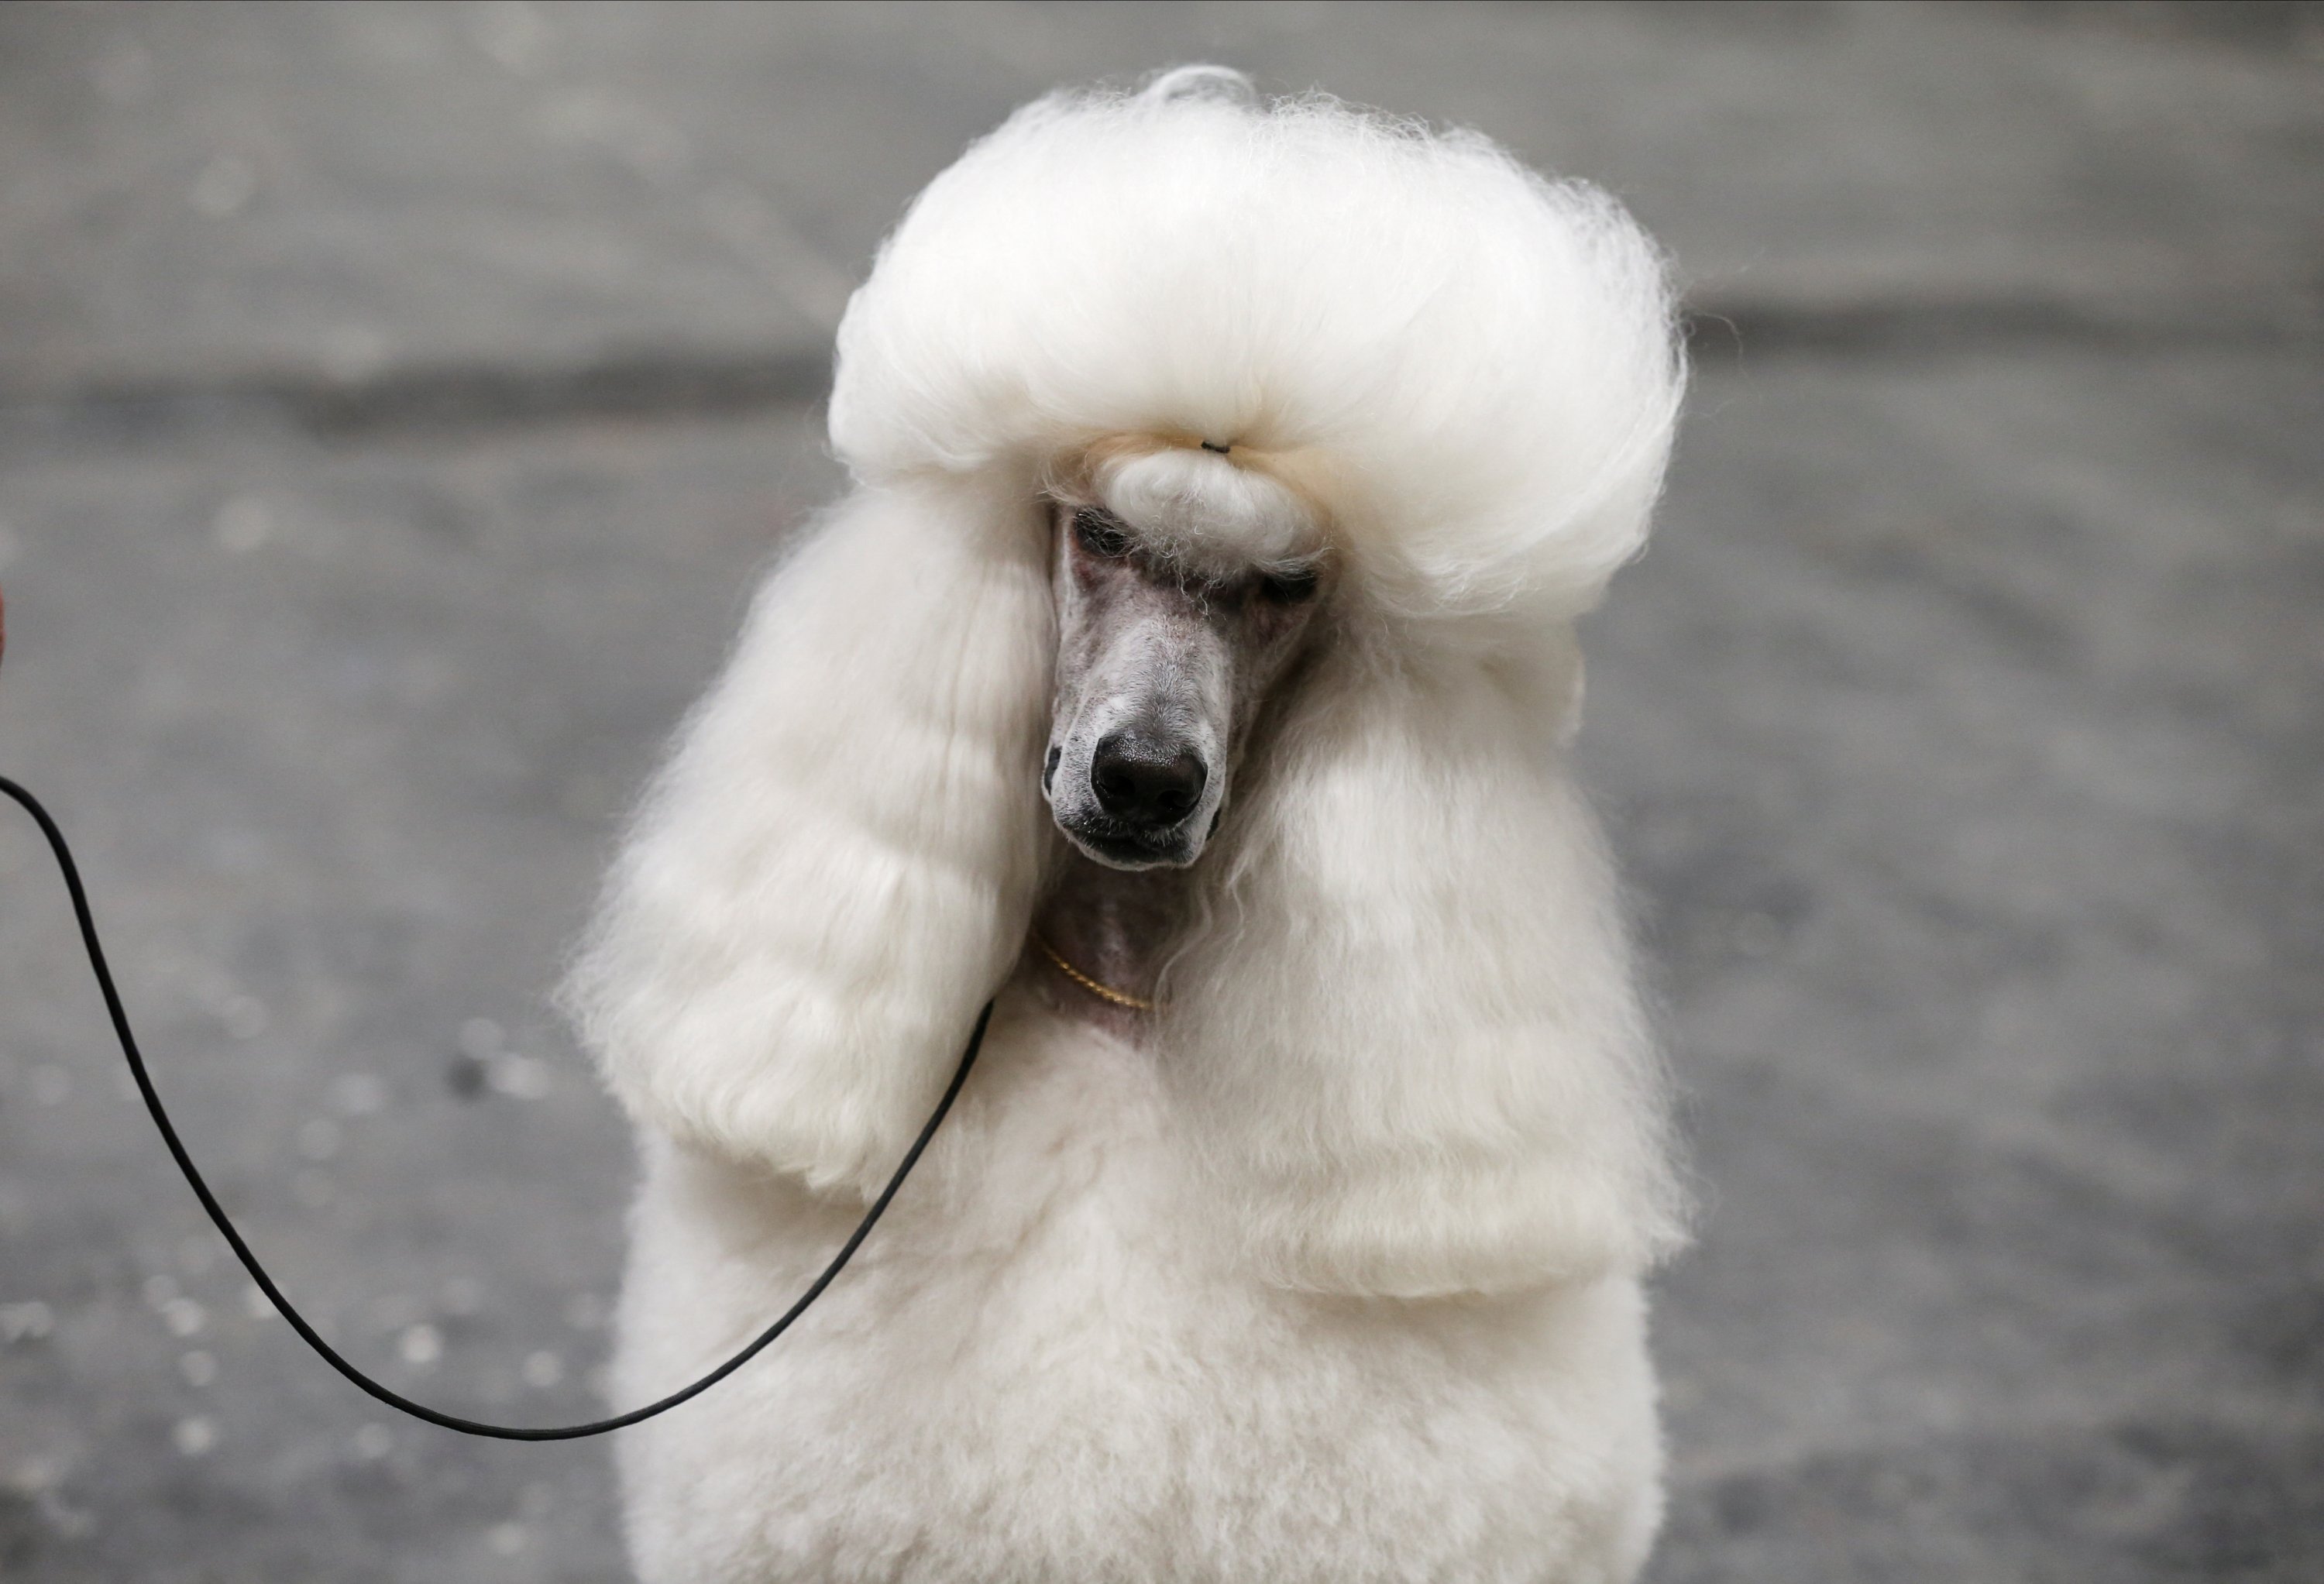 A Standard Poodle waits ahead of the competition at the 2022 World Dog Show, where more than 15,000 dogs from all around the globe are expected to attend, at the IFEMA conference center in Madrid, Spain June 23, 2022. (Reuters Photo)